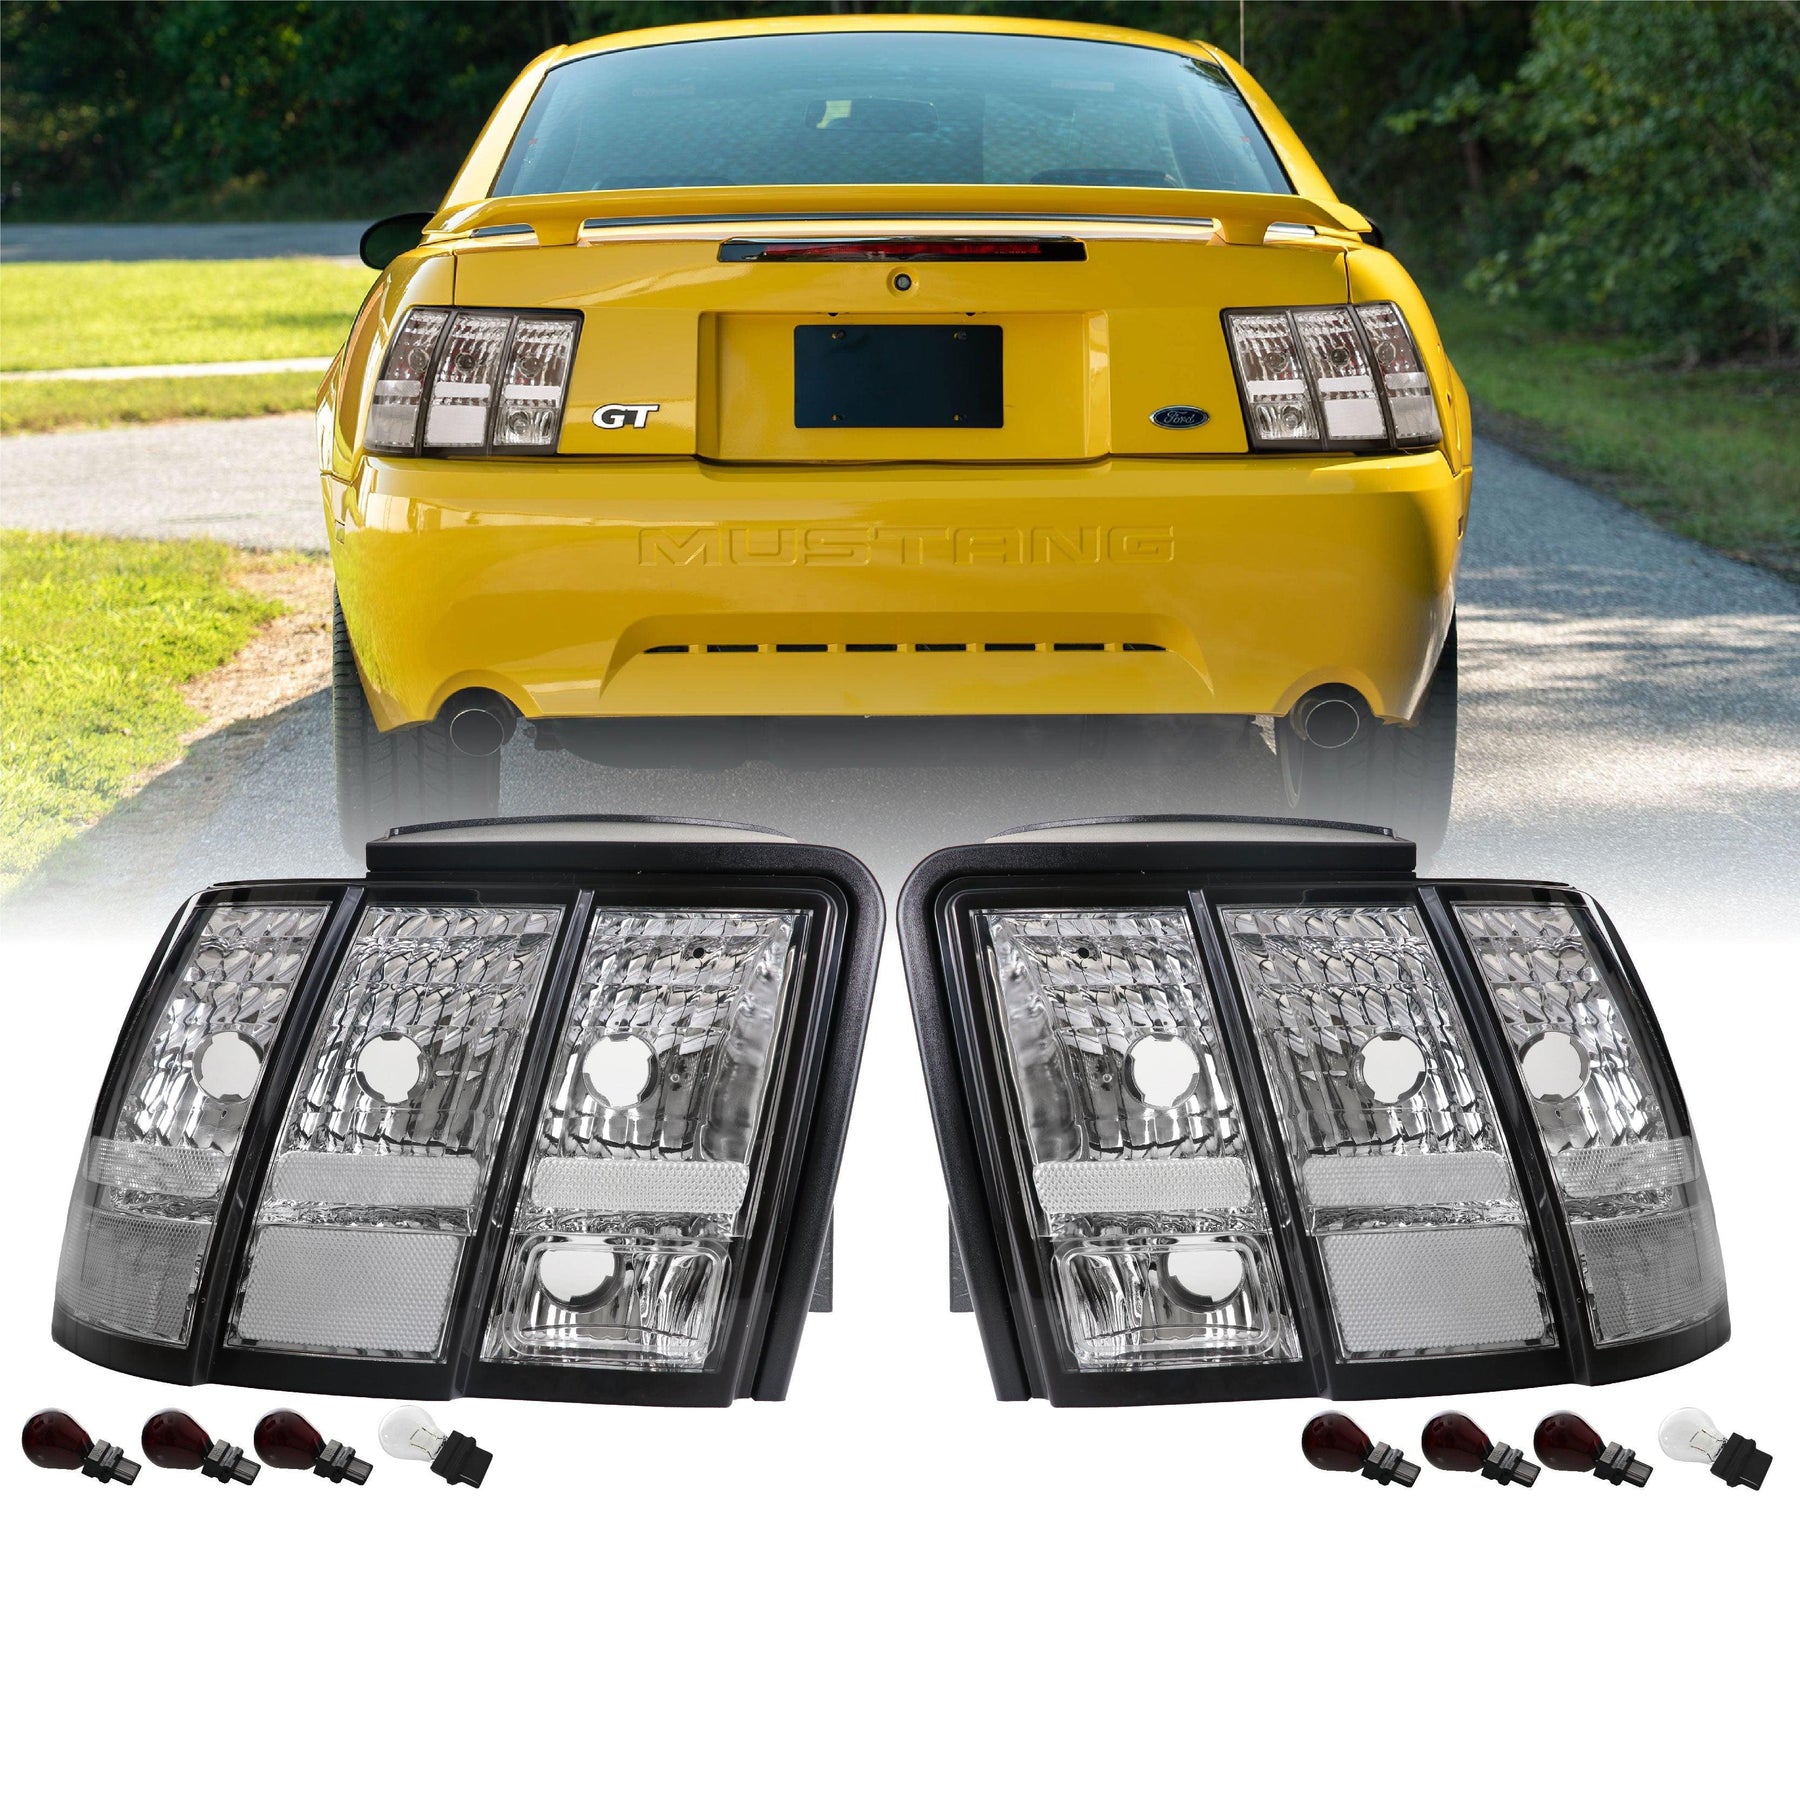 Sonar Rear Tail Light Set For Ford 99-04 Mustang Unique Spider / Check  Pattern